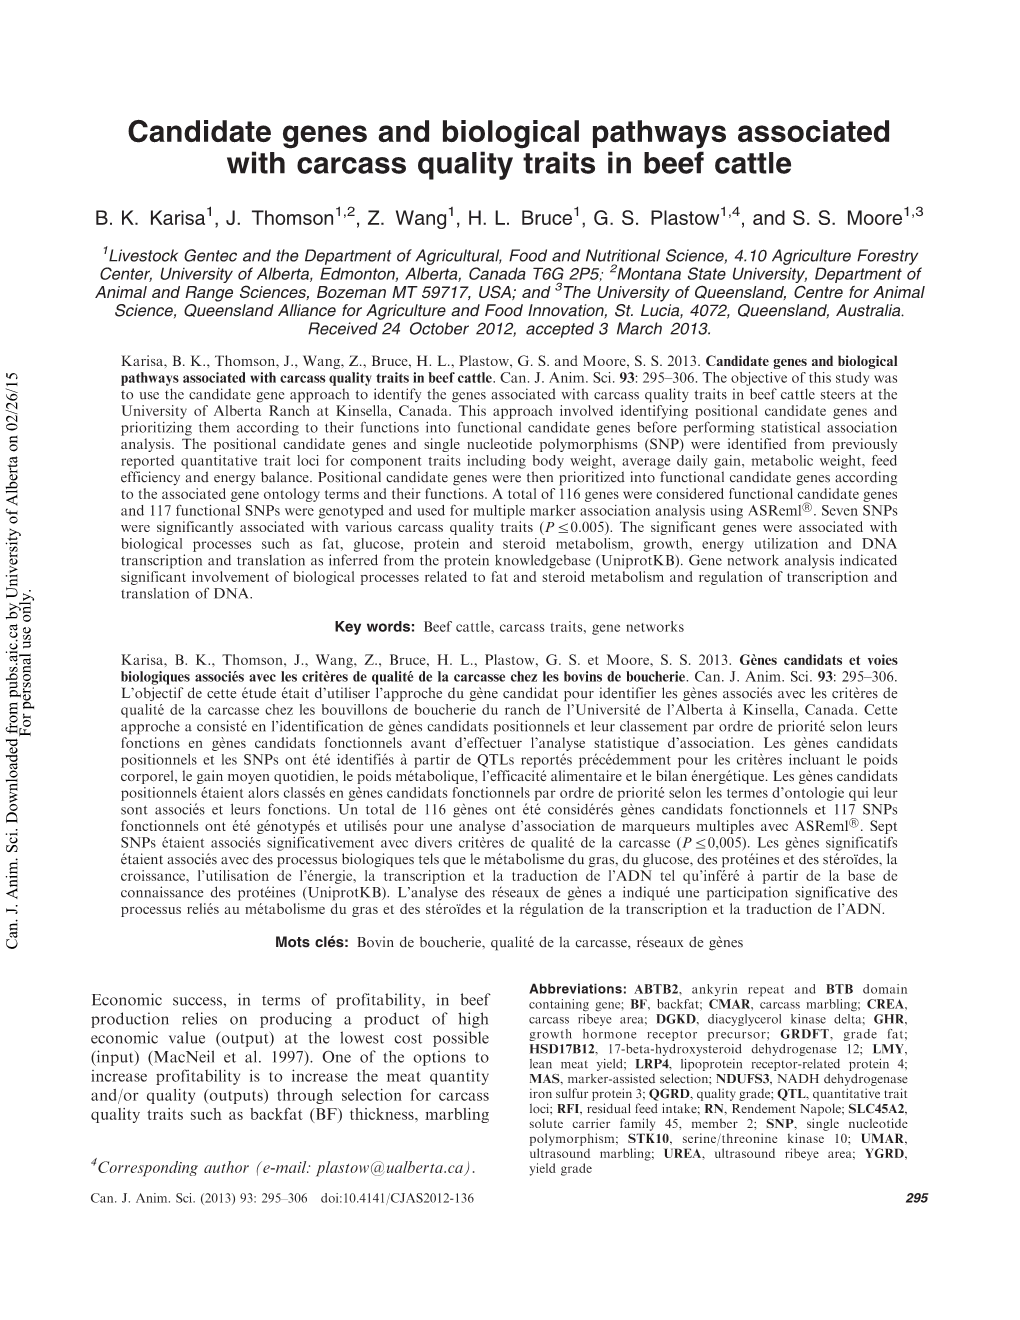 Candidate Genes and Biological Pathways Associated with Carcass Quality Traits in Beef Cattle